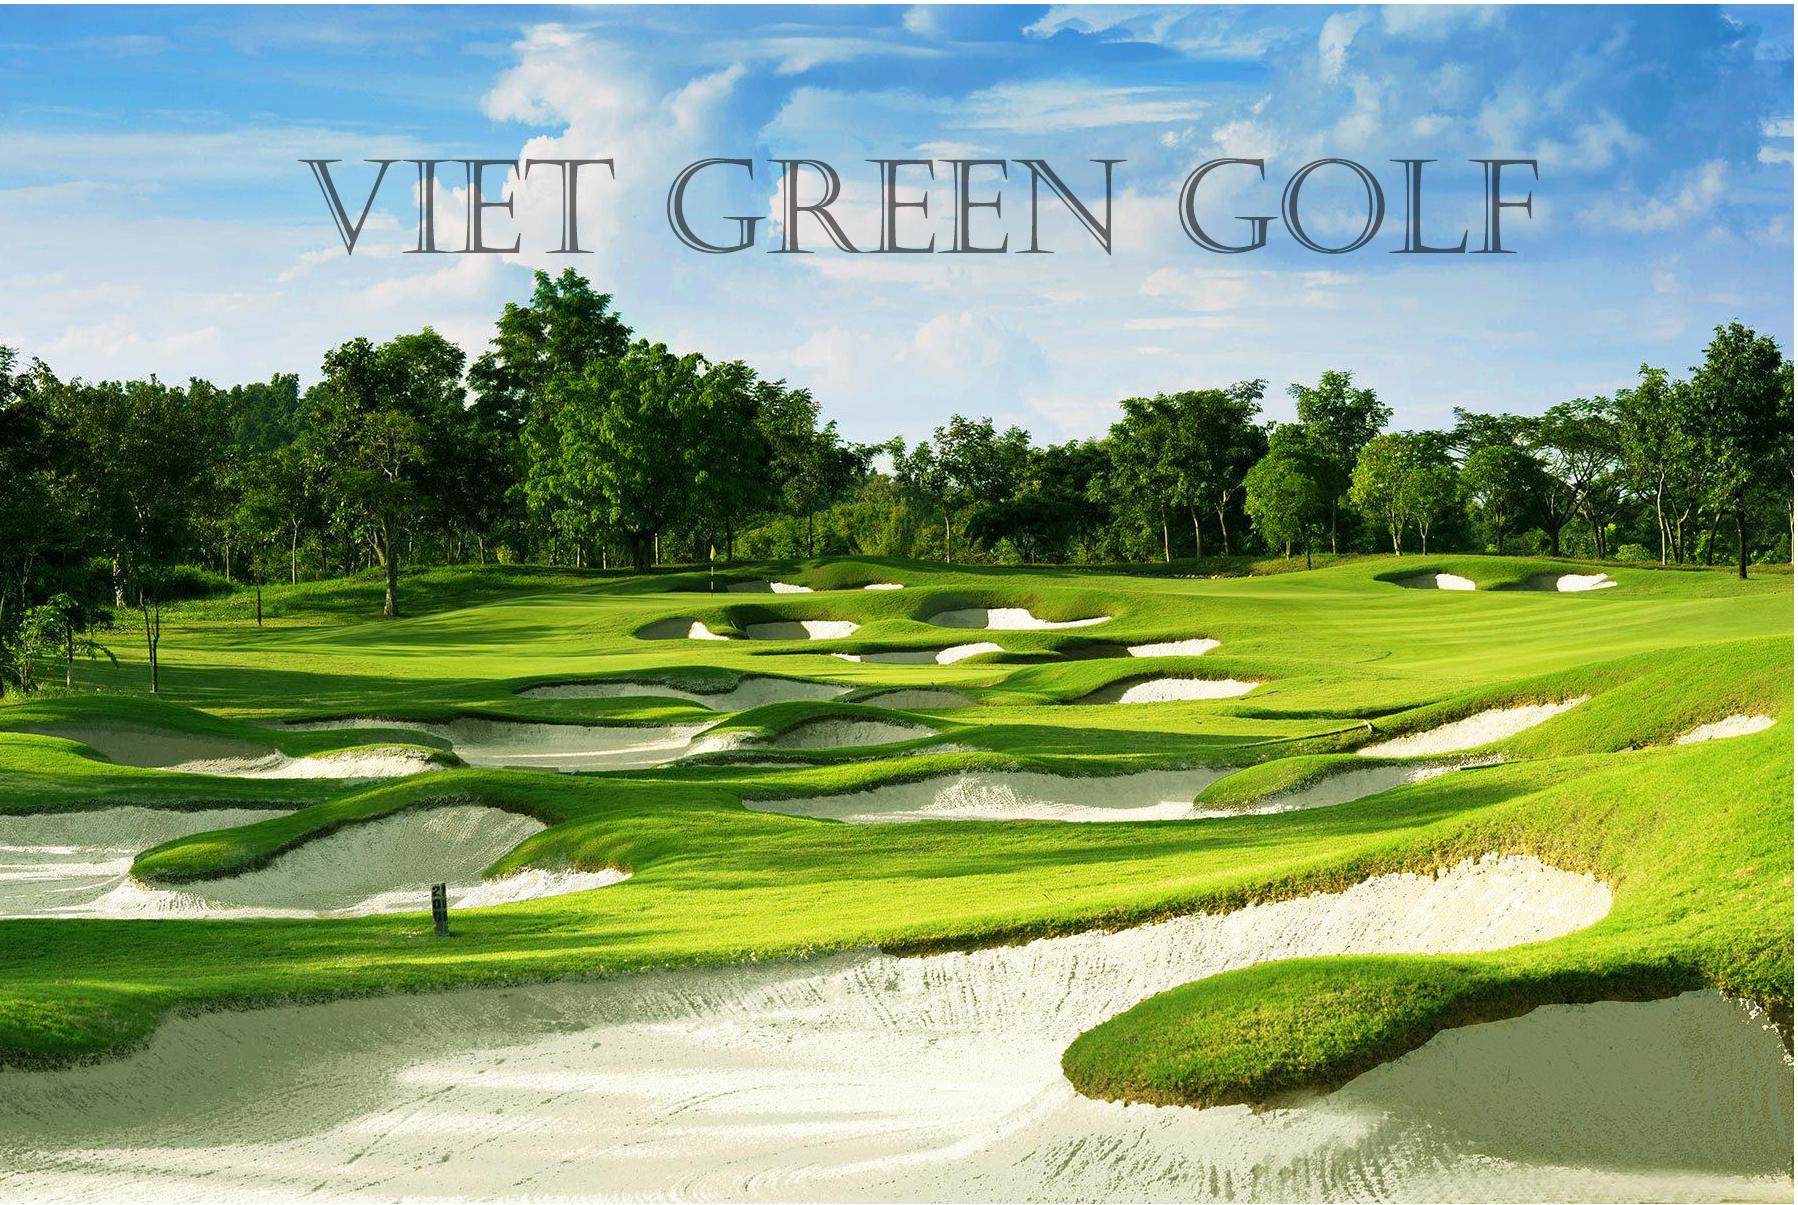 Thailand Golf: Pattaya Golf Holiday Package 5 Days With 3 Rounds